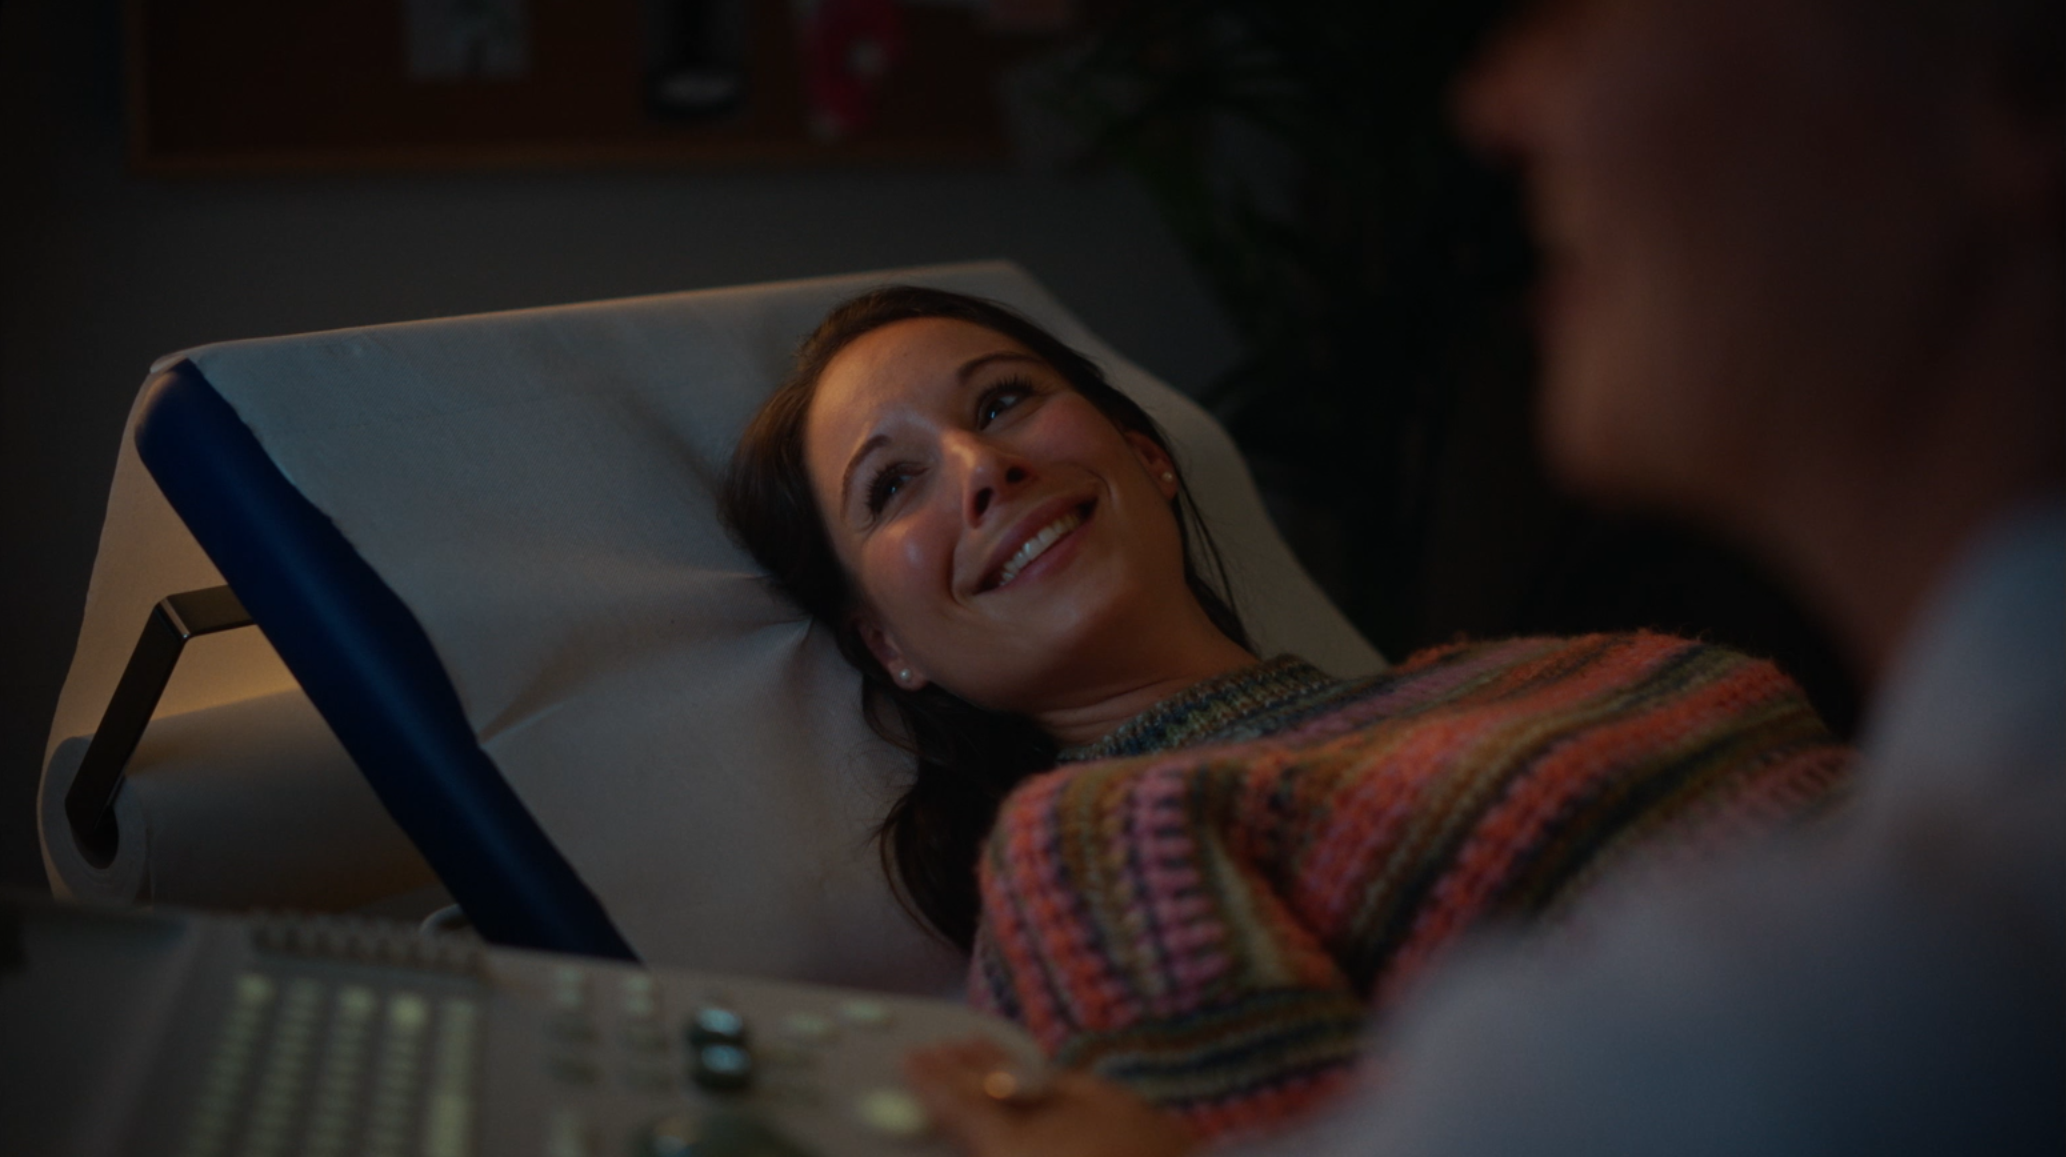 A pregnant woman smiling while looking at an ultrasound machine monitor